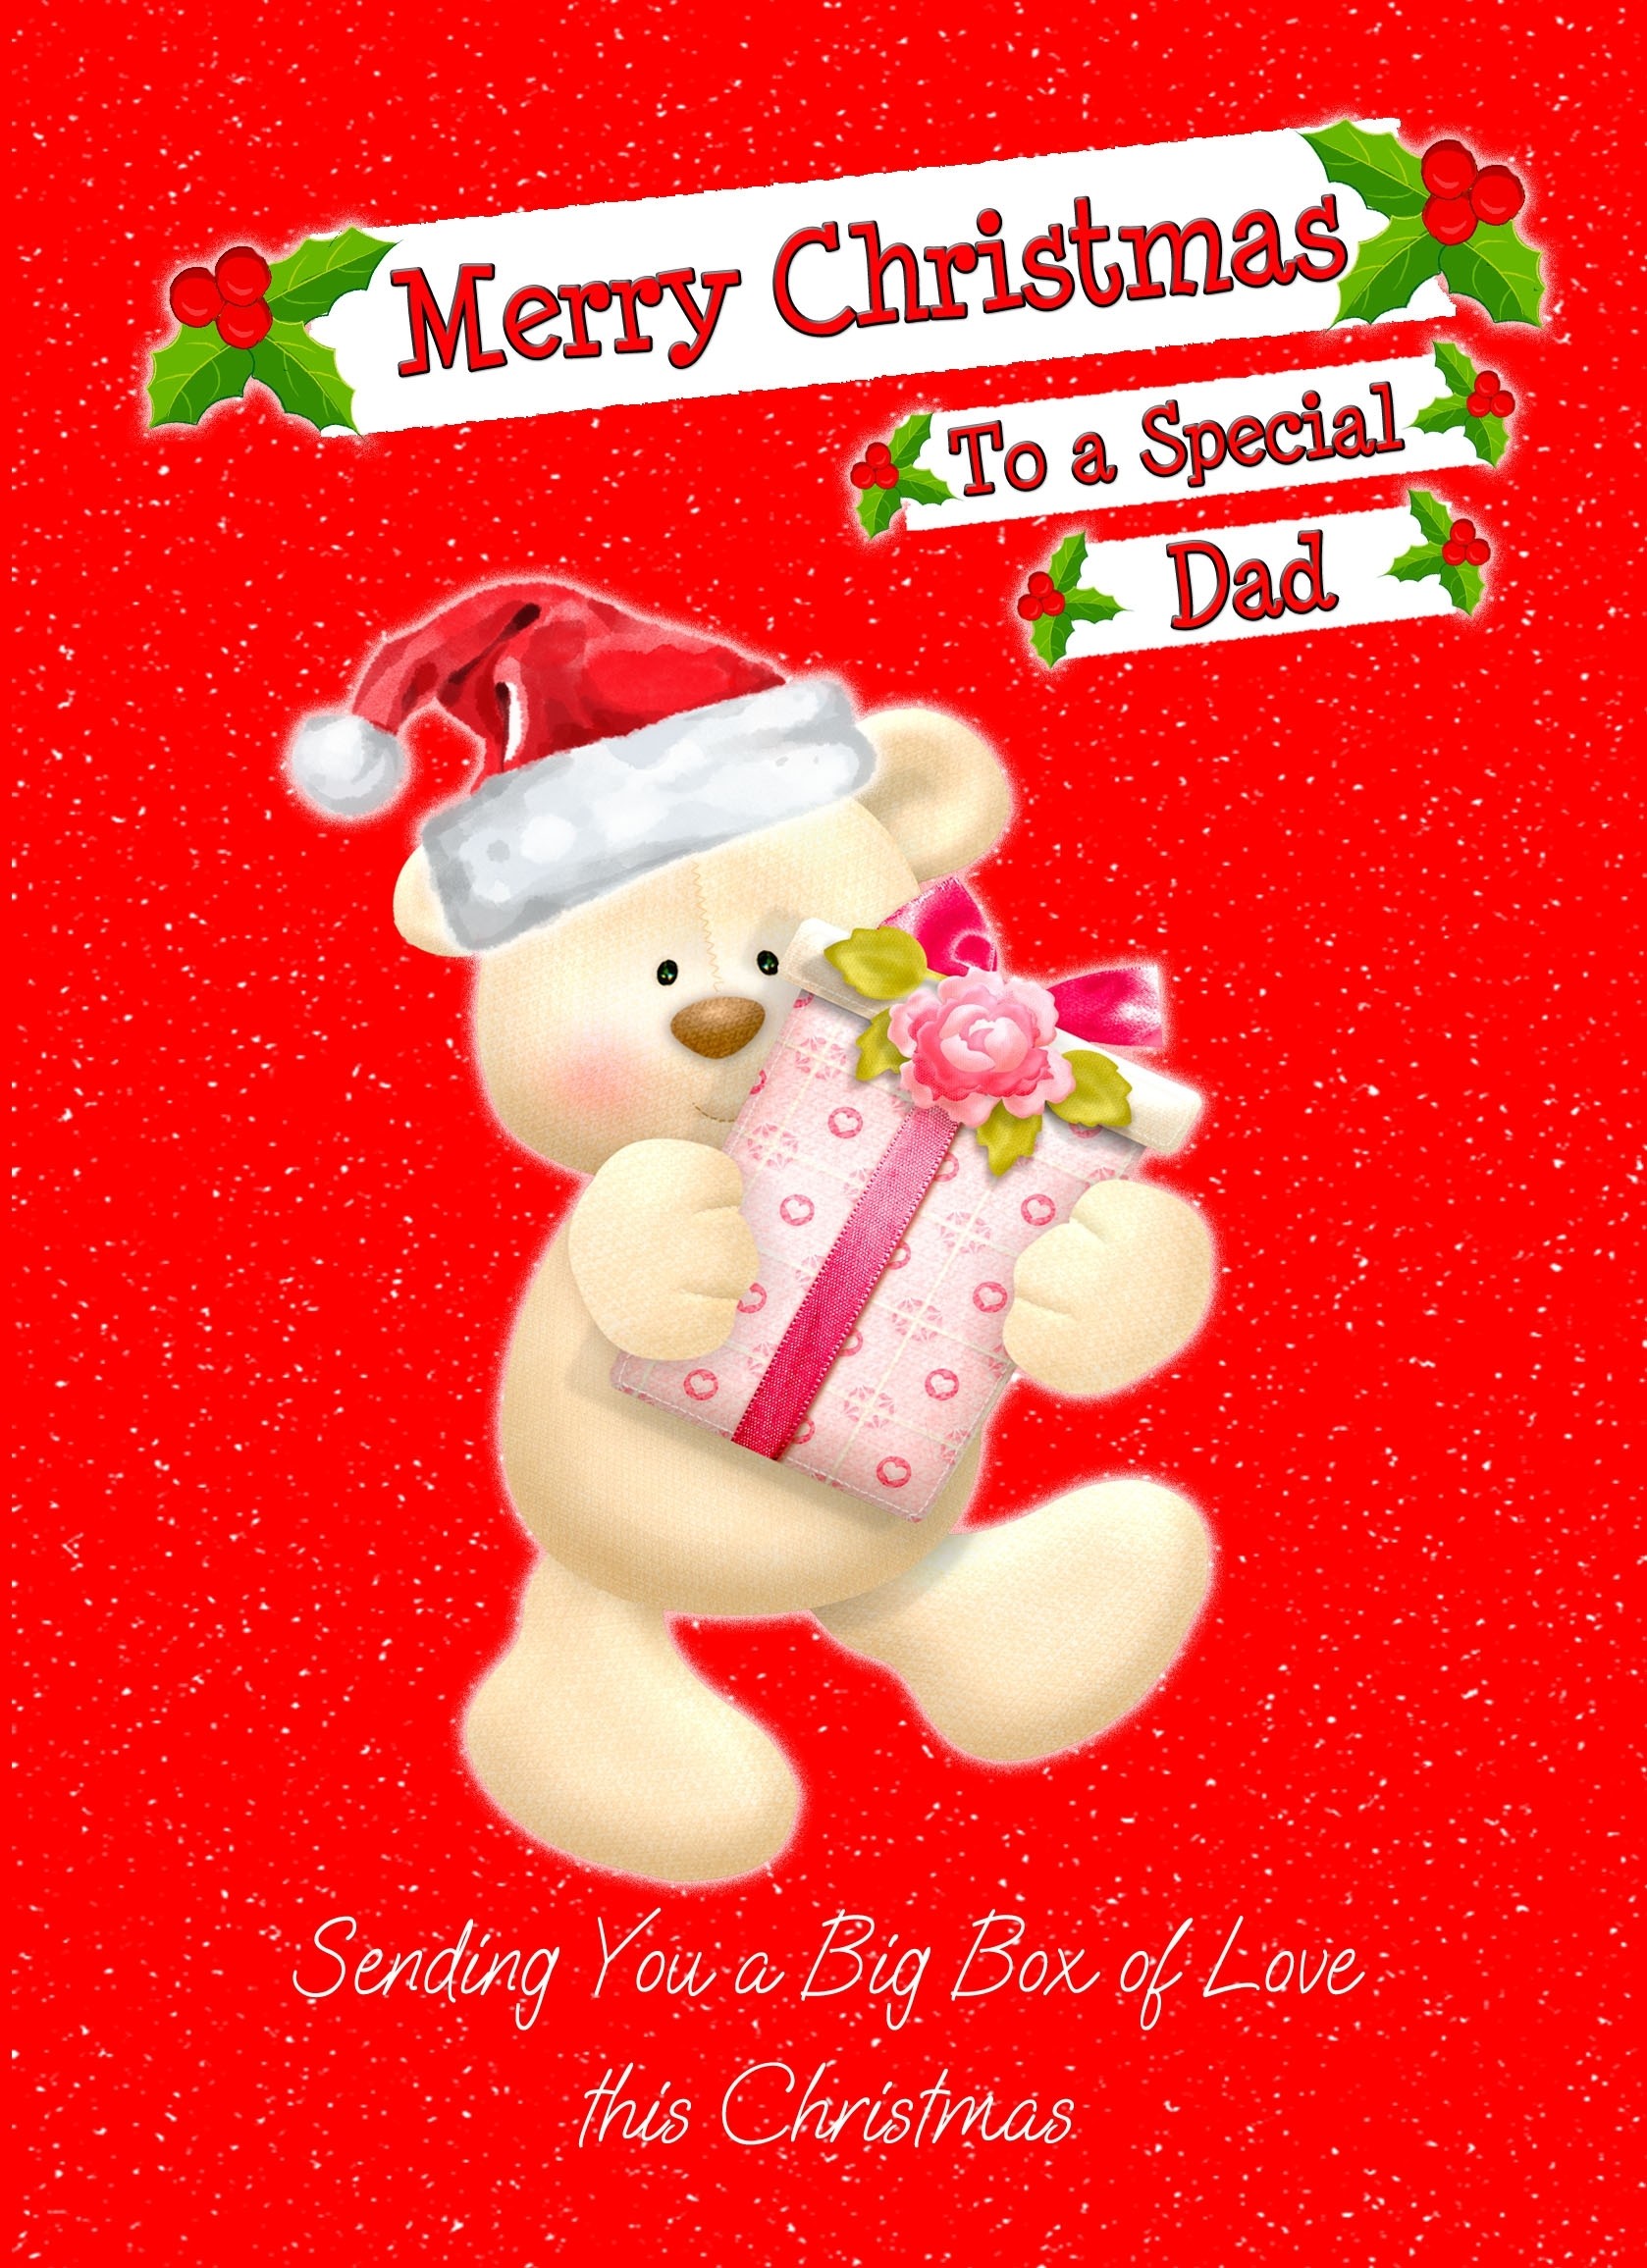 Christmas Card For Dad (Red Bear)